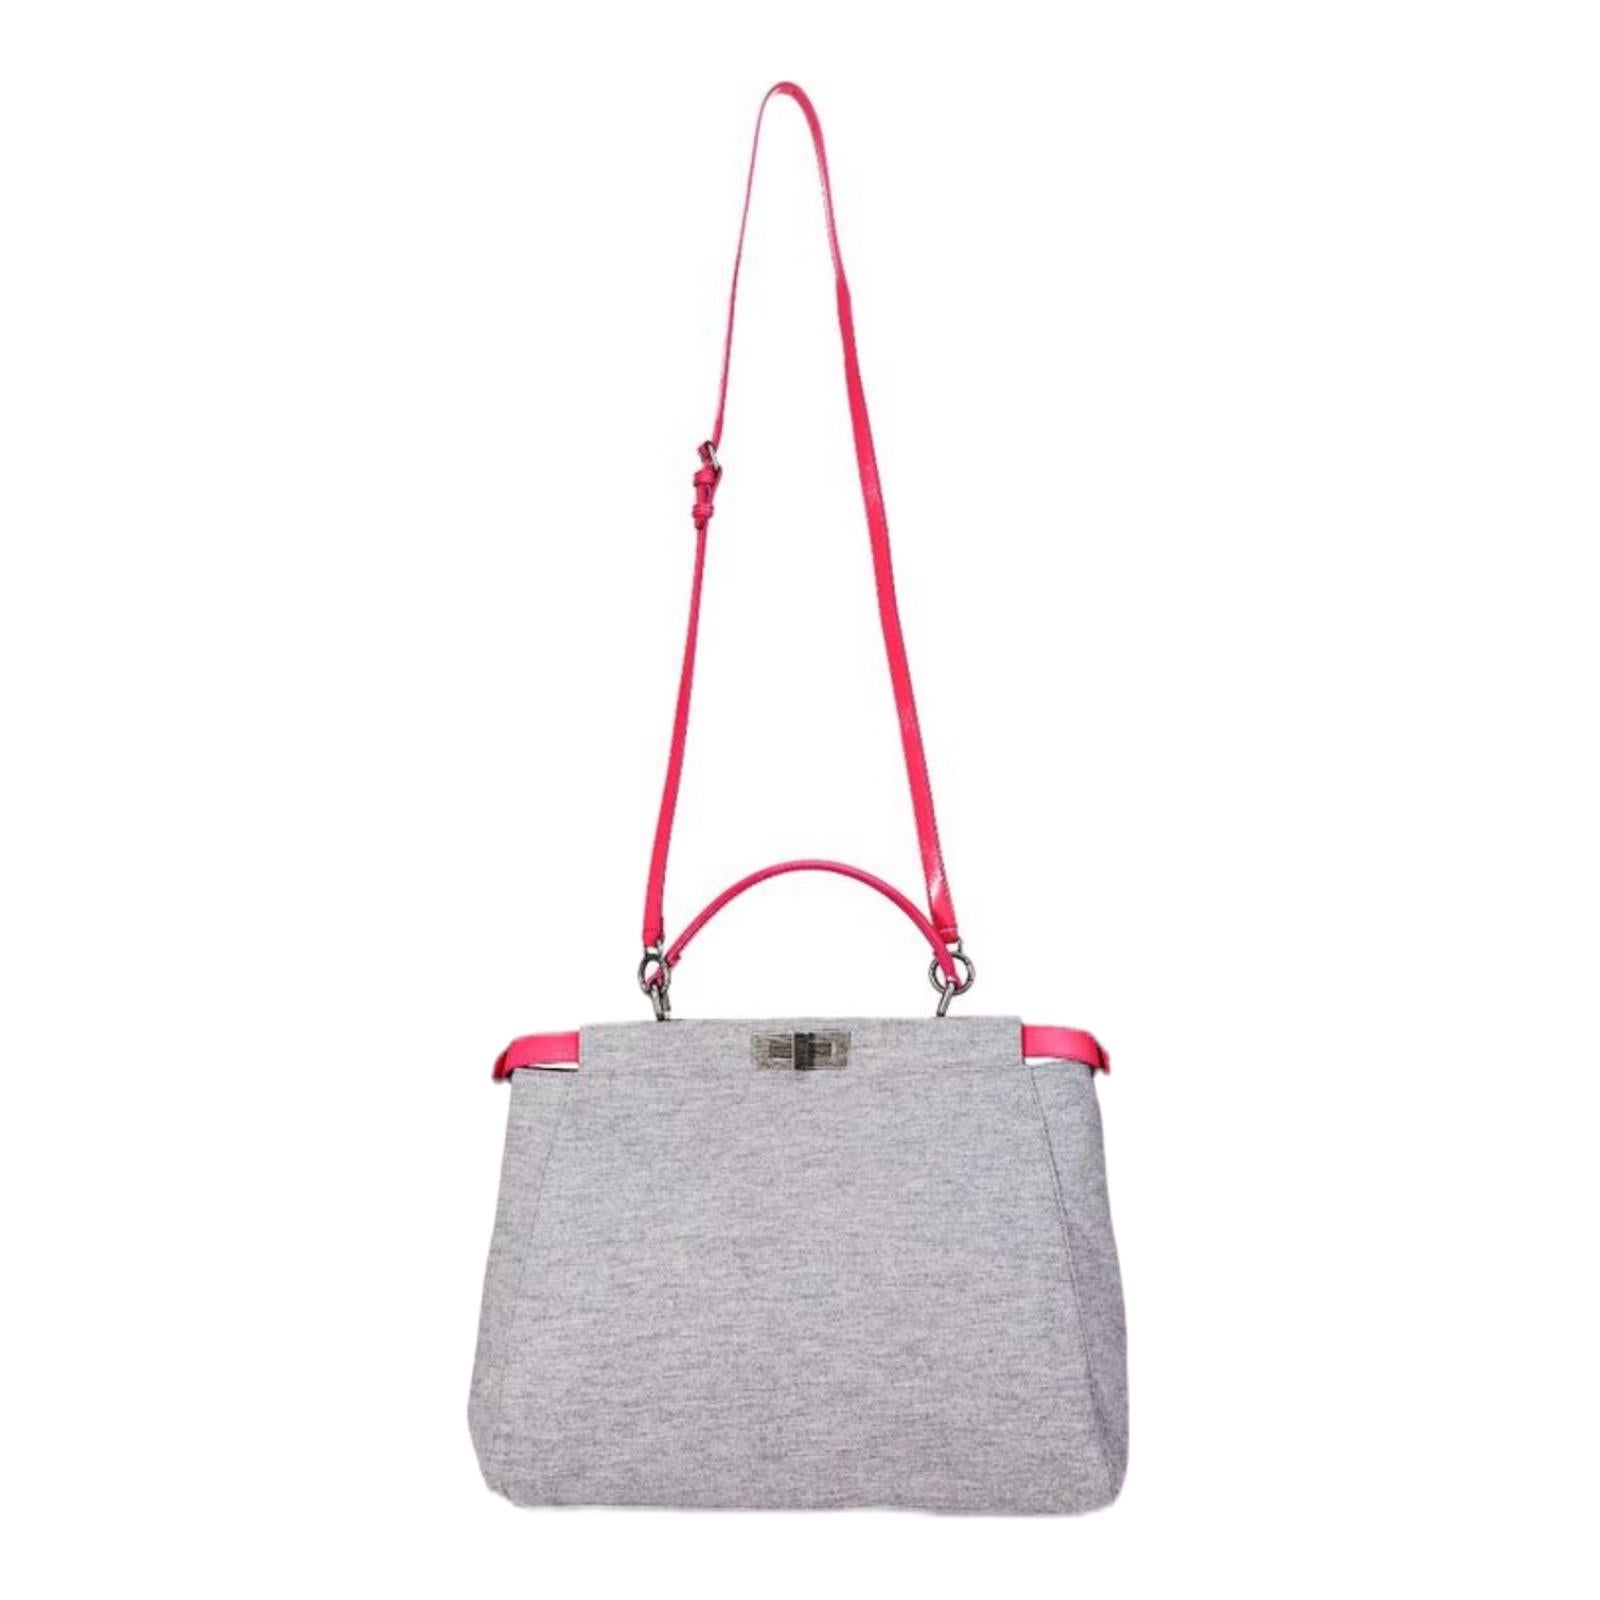 UNWORN Fendi Large Peekaboo Limited Edition Pink Leather & Grey Bag with Strap For Sale 1